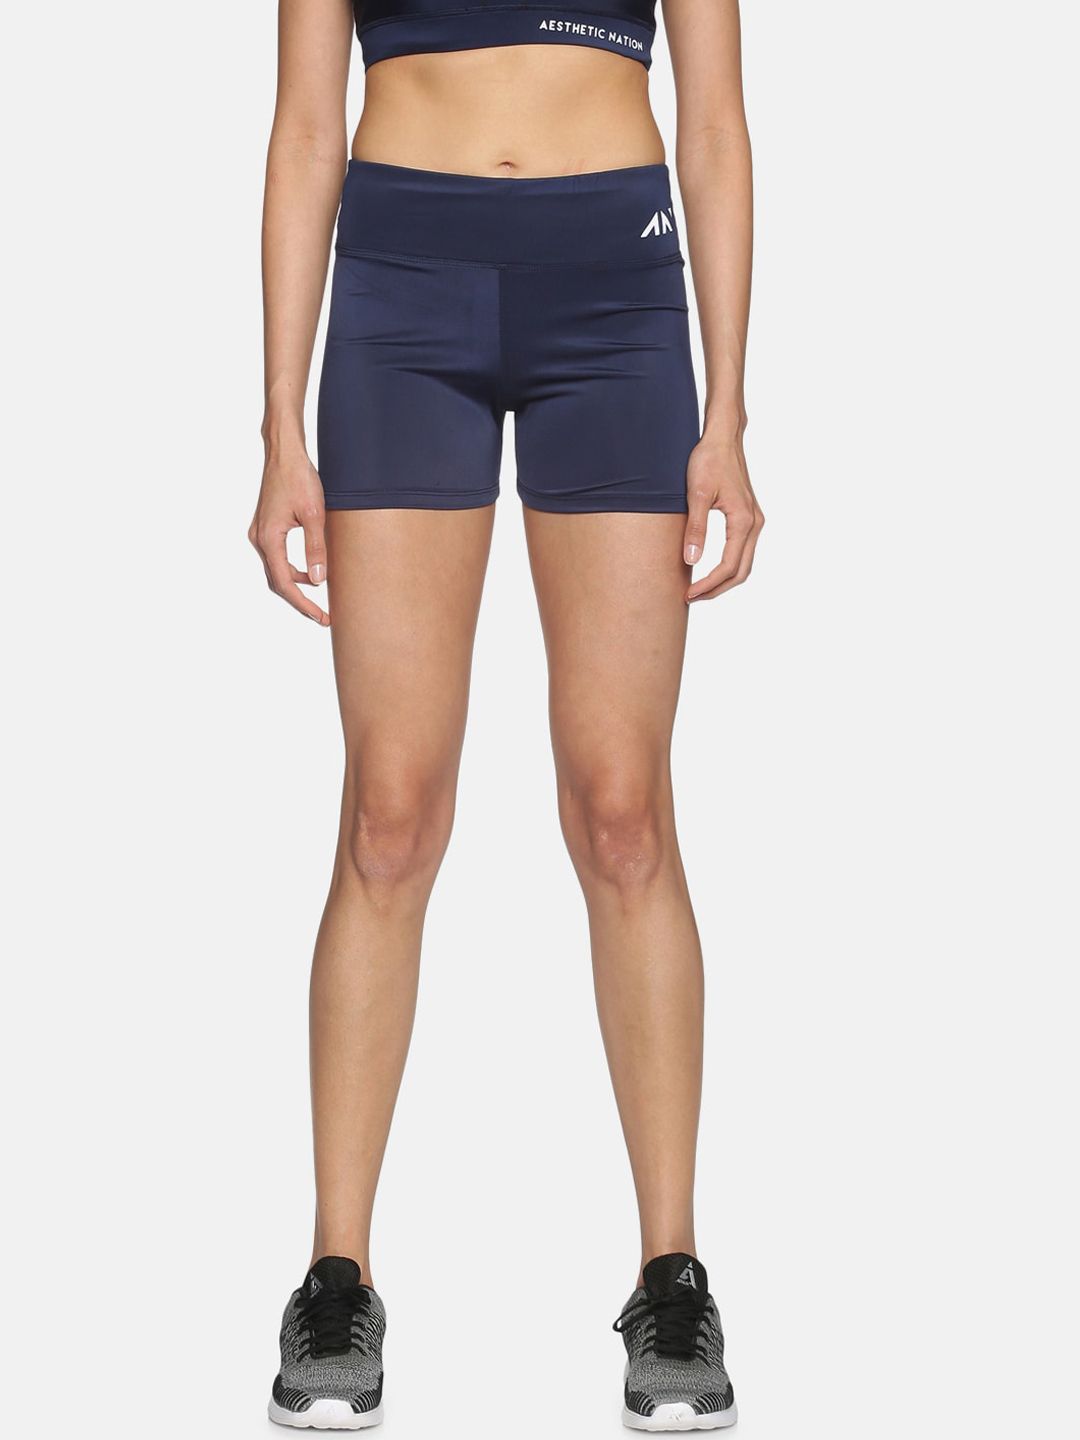 AESTHETIC NATION Women Navy Blue Slim Fit Sports Shorts Price in India